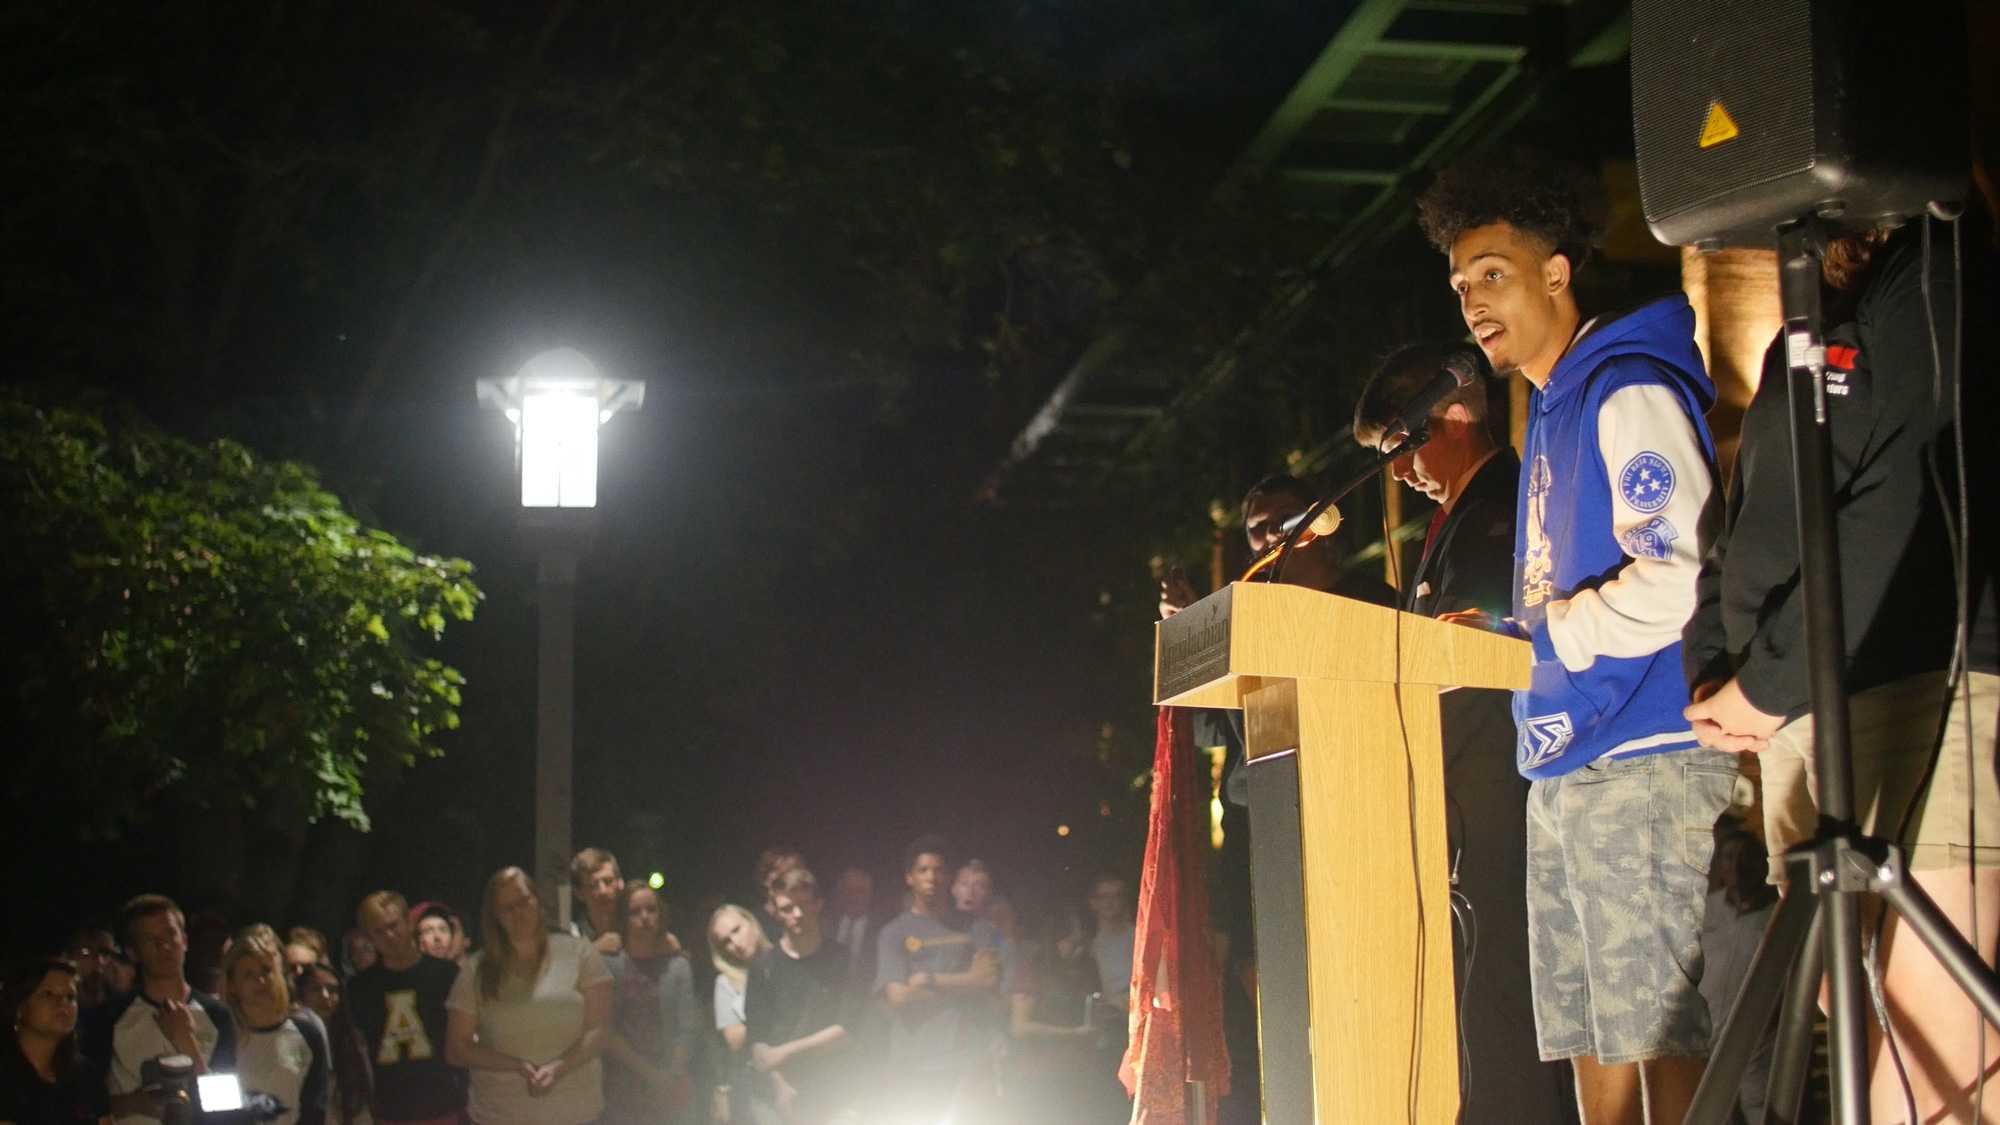 SGA President, Jalyn Howard, speaks about who he walks for during this year's Walk for Awareness. Photo by Maleek Loyd